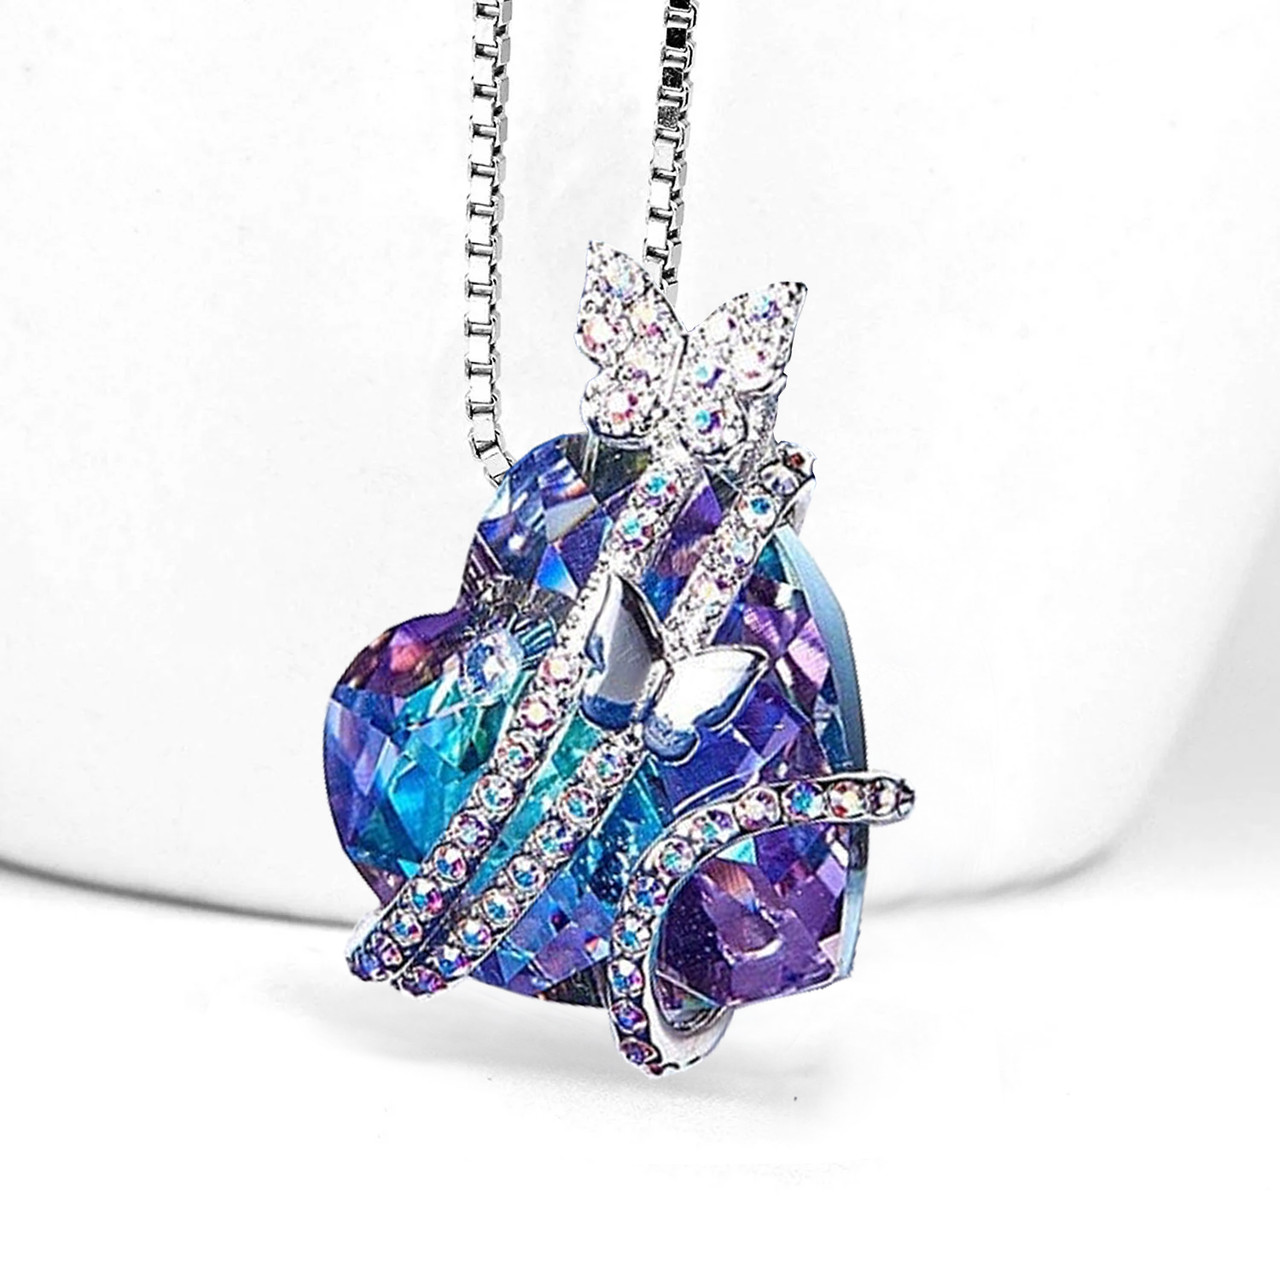 Butterfly Design Pendant with Crystal Heart - Blue and Purple - with 18" Chain Necklace. Gift for Lover, Girl Friend, Wife, Valentine's Day Gift, Mother's Day, Anniversary Gift Butterflies Necklace.